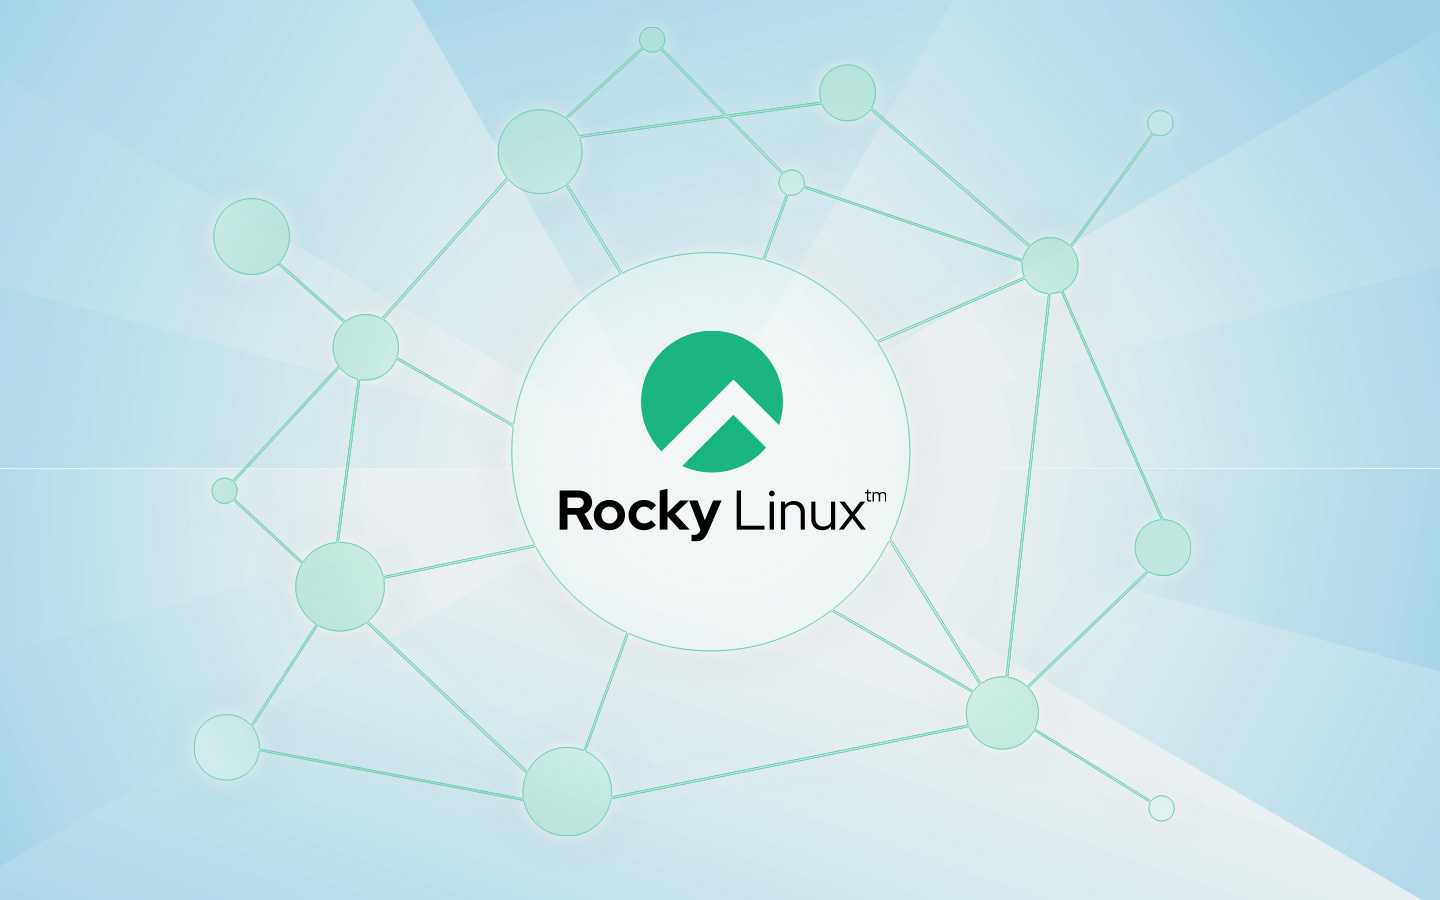 How to Add Users on Rocky Linux with Sudo Privileges from the Command Line